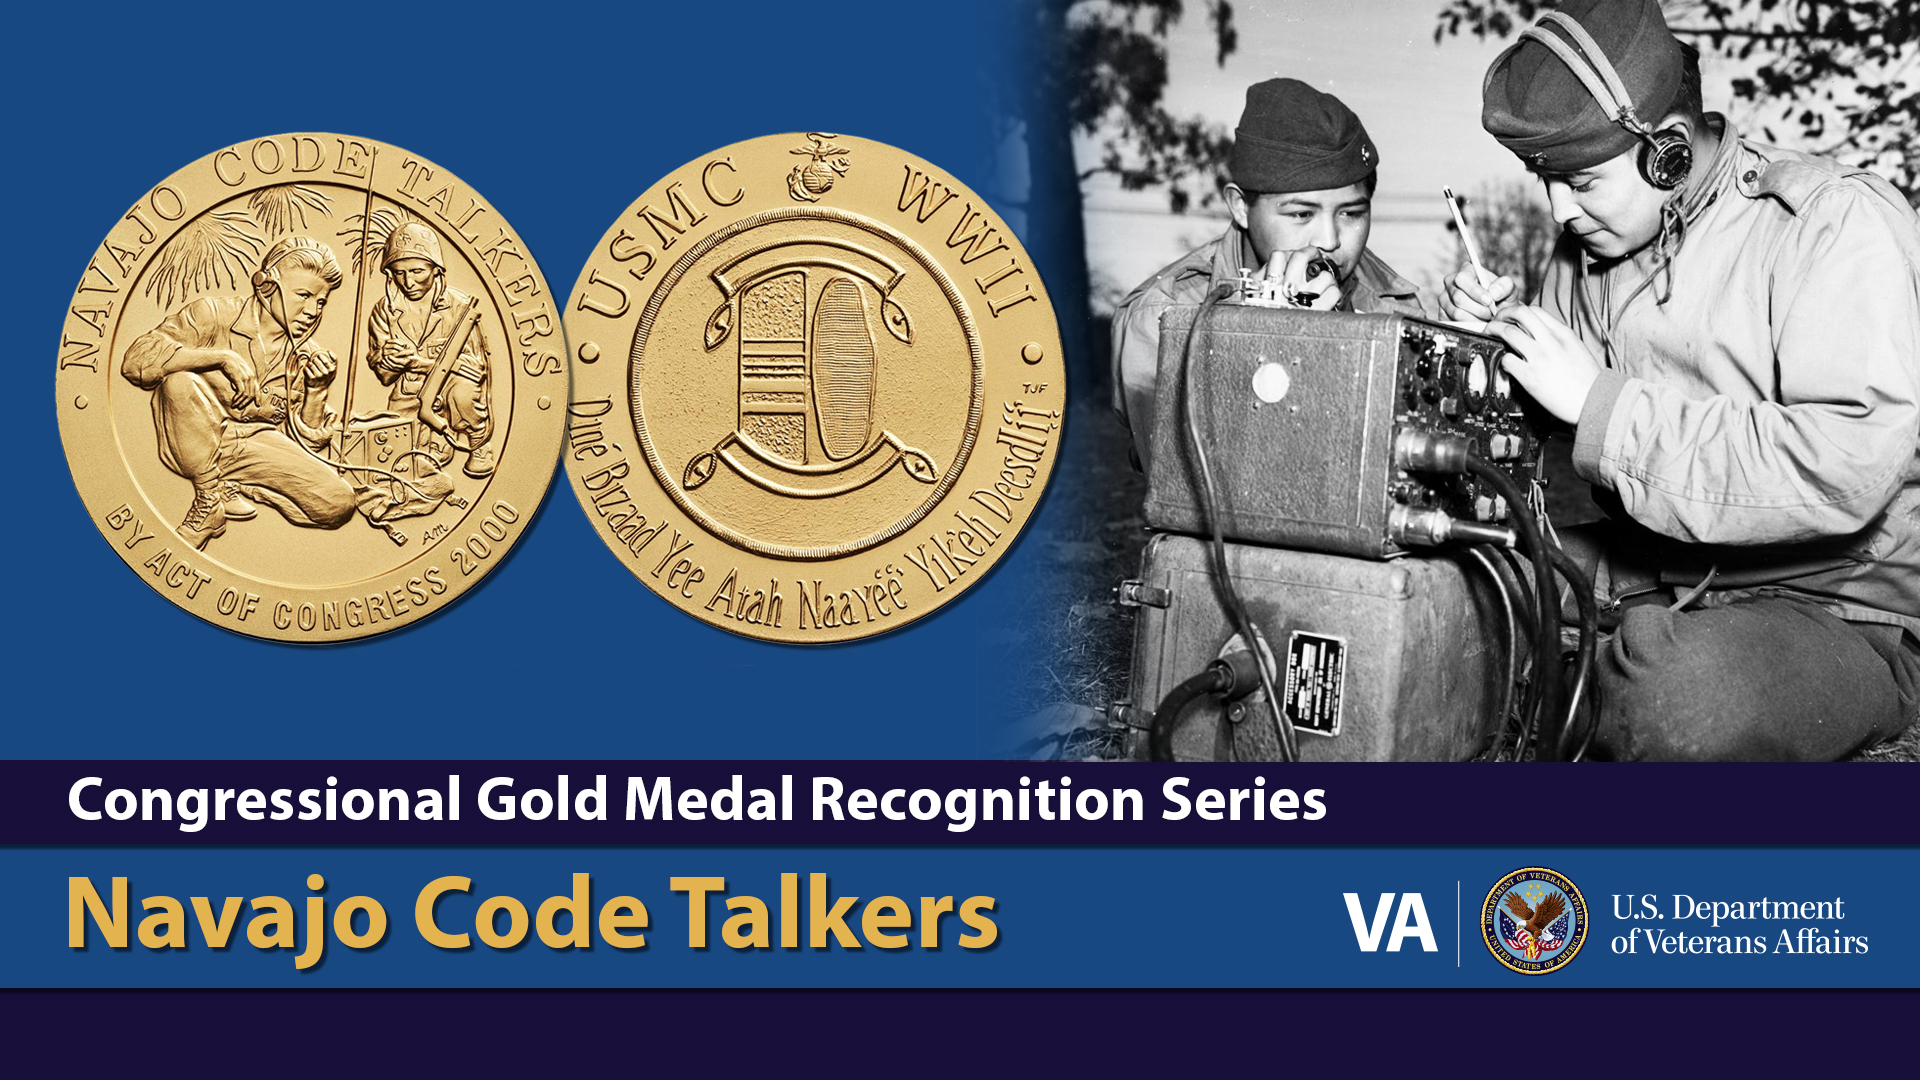 Continue reading Navajo Code Talkers and the Congressional Gold Medal